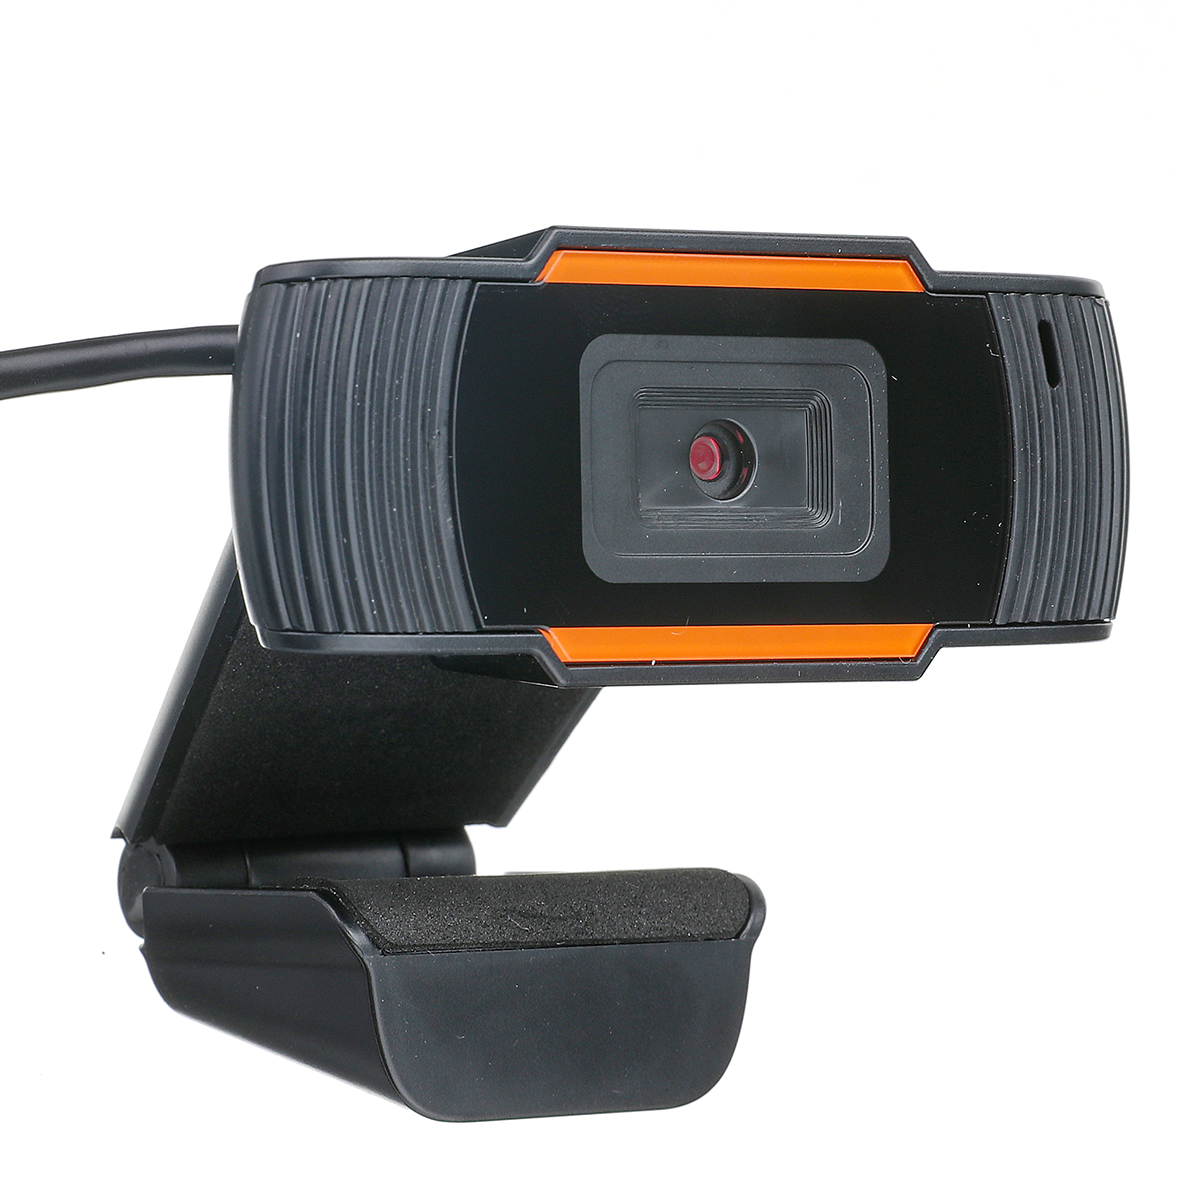 Find MECO ELEVERDE HD 1080P Webcam Auto Focus Wide Angle View Built in Noise Cancellation Microphone Wired USB2 0 Computer Camera for Sale on Gipsybee.com with cryptocurrencies